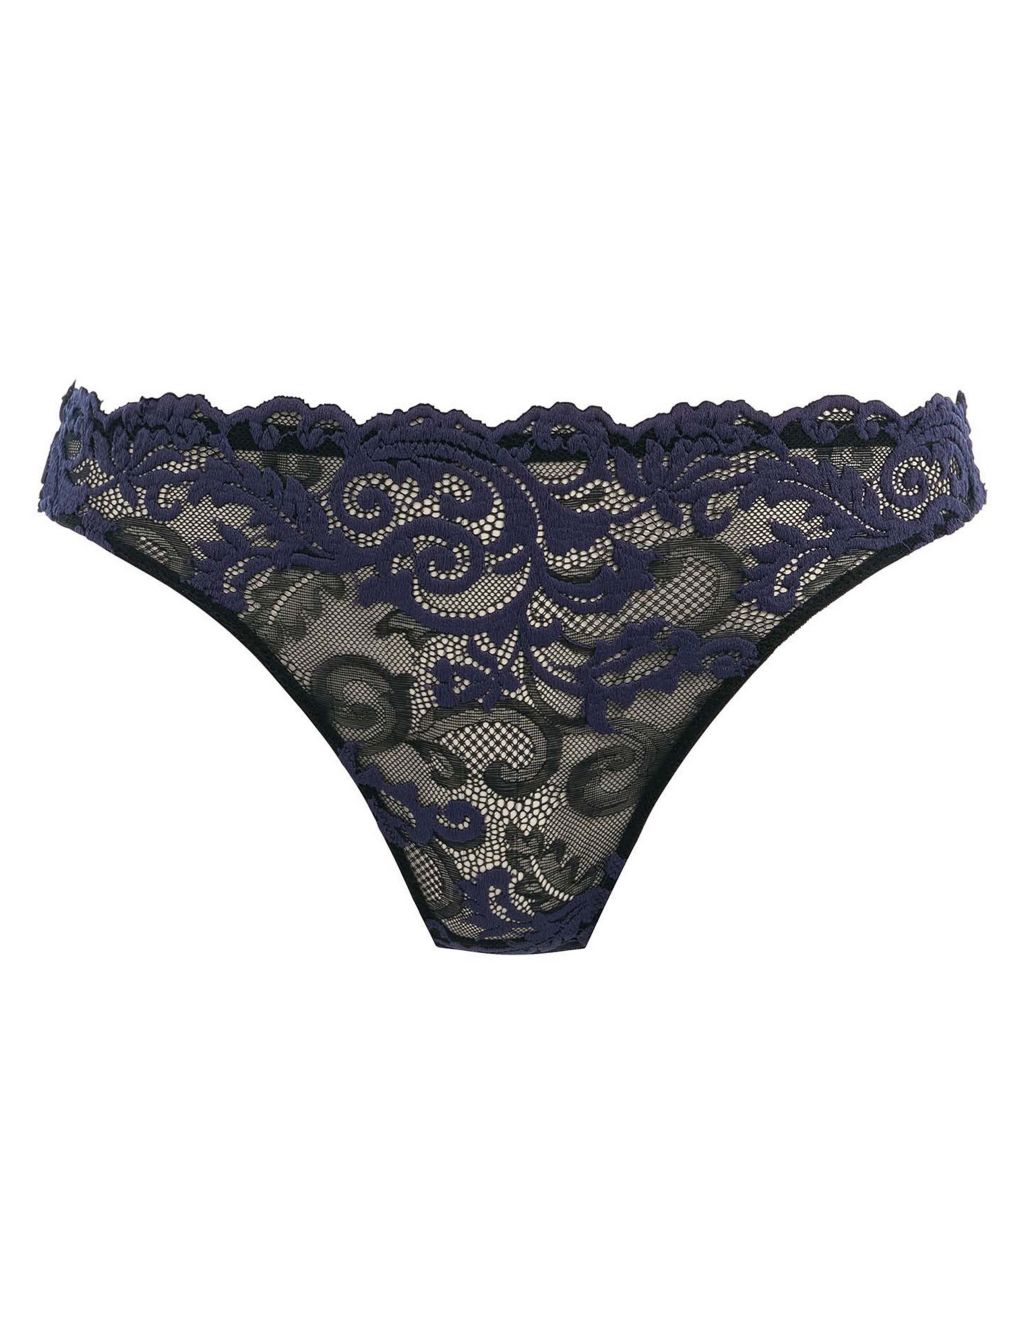 Instant Icon Floral Lace Thong image 2